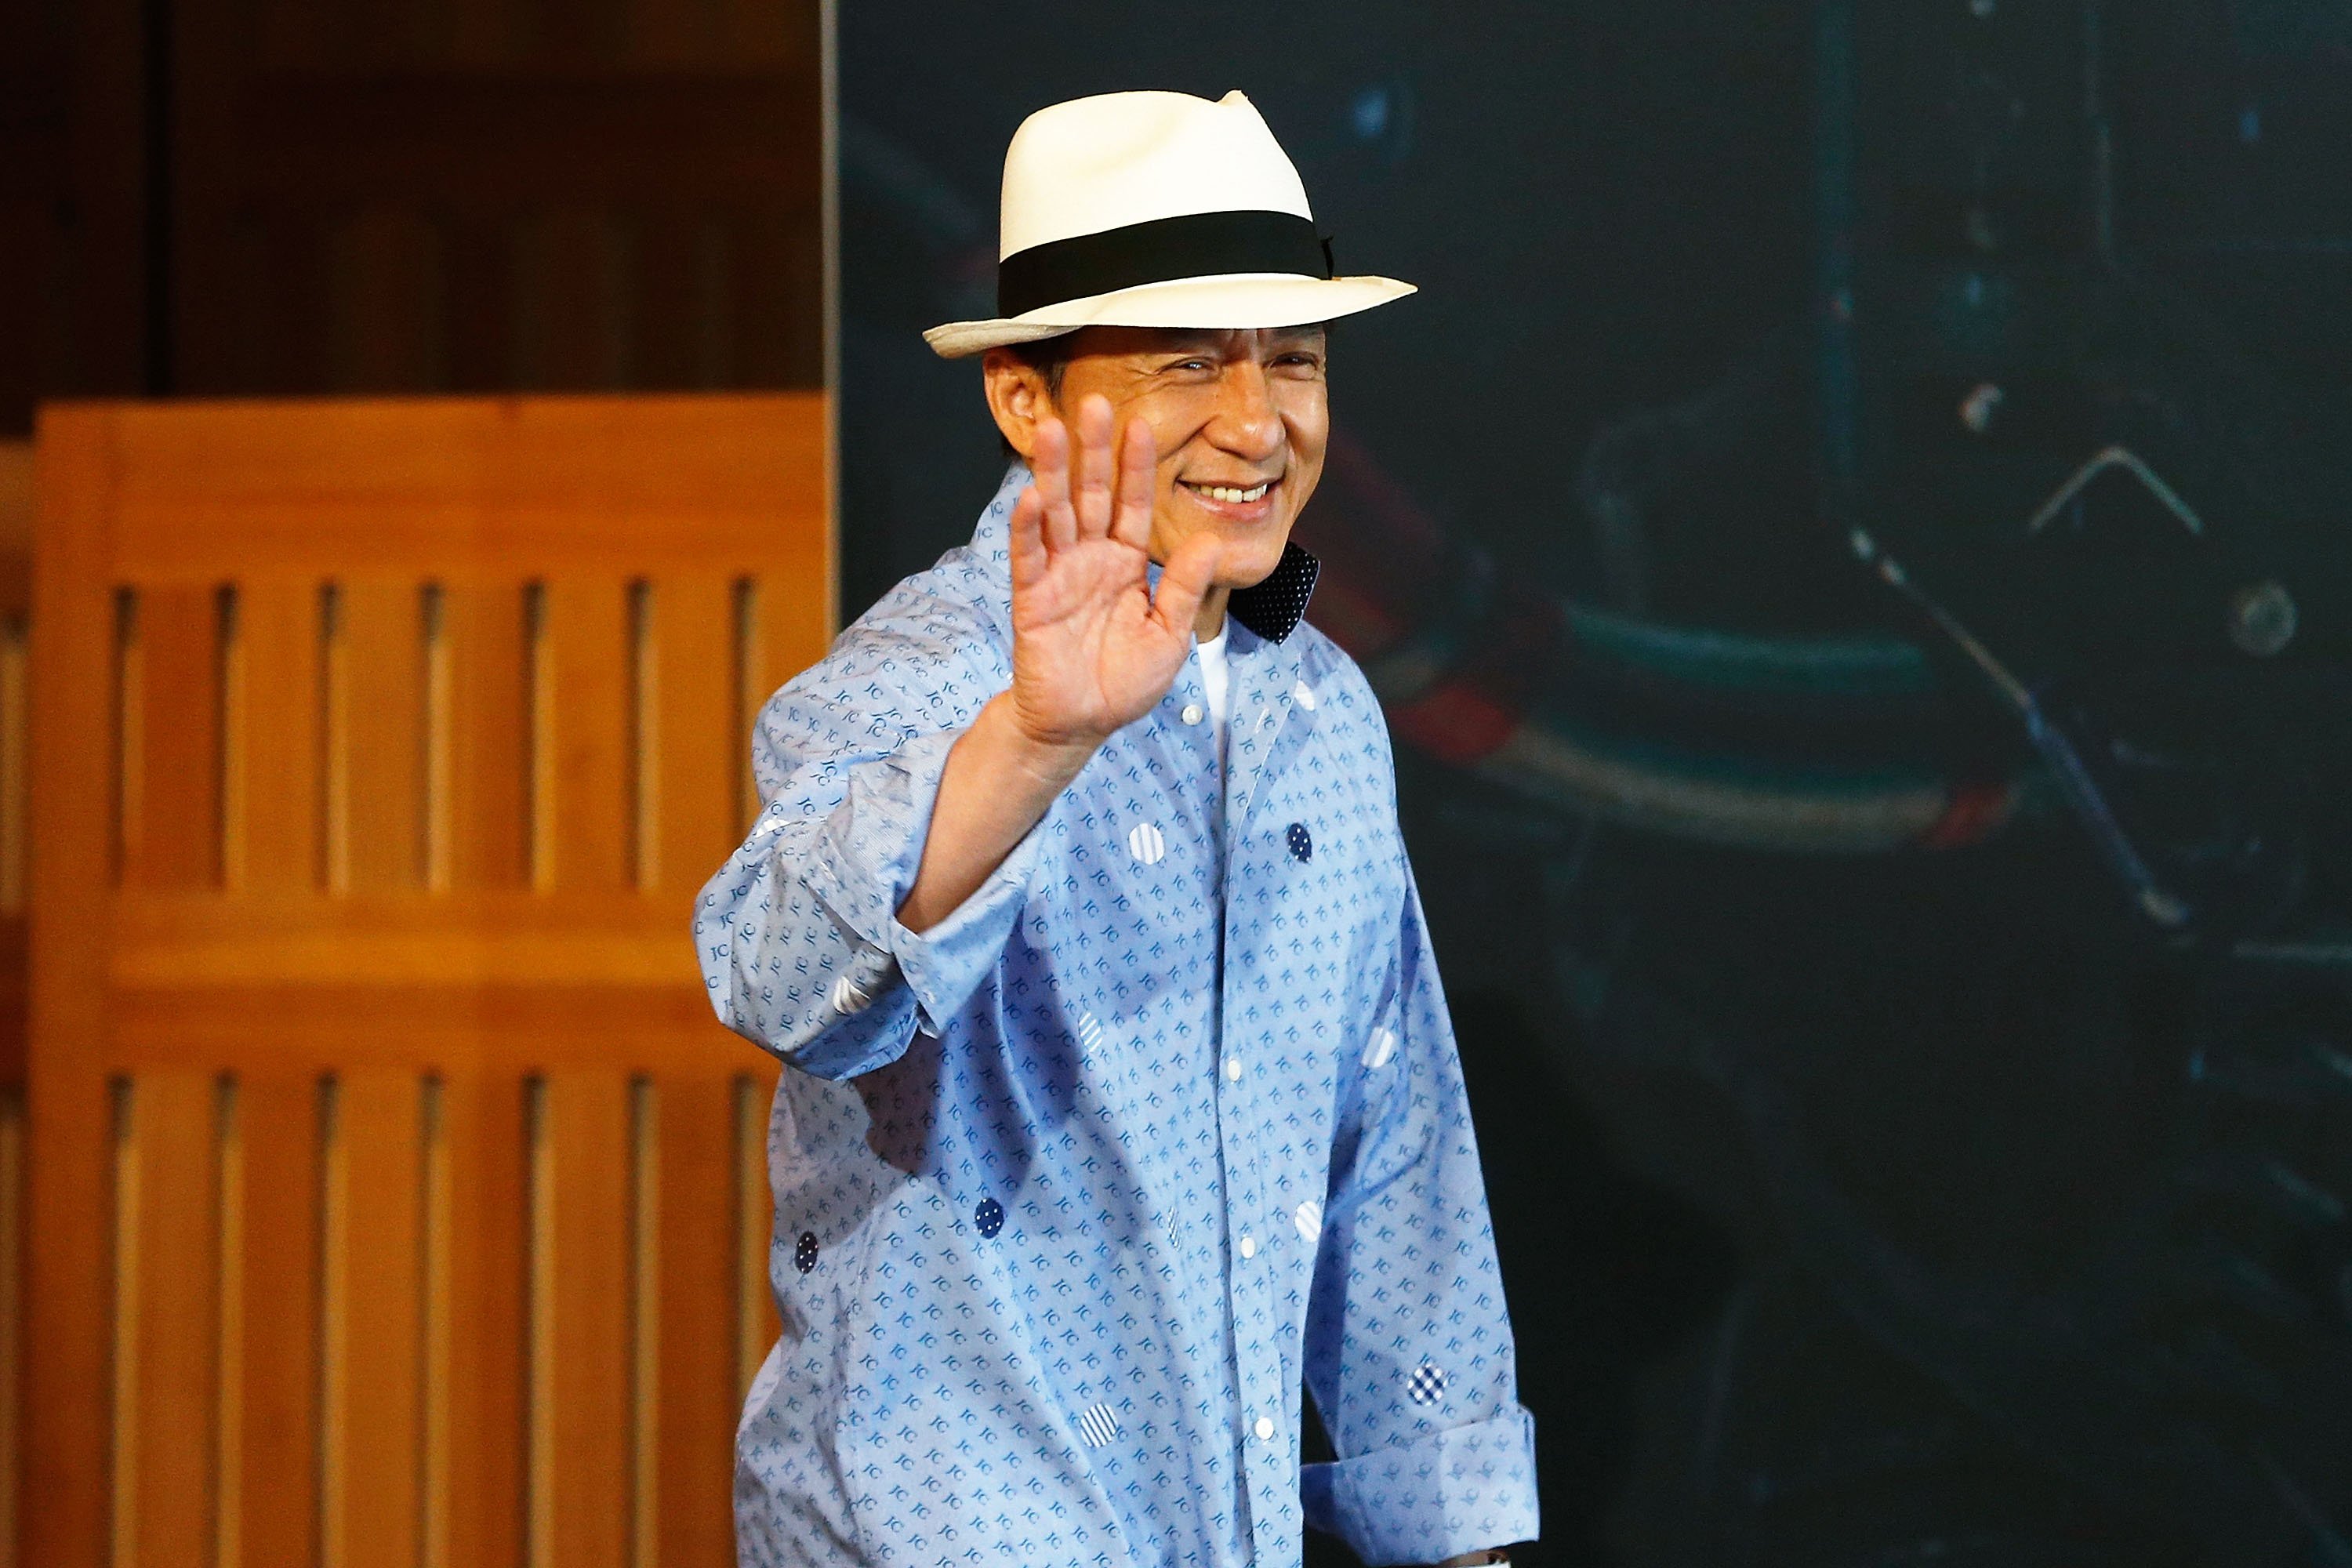 Jackie Chan arrives at a press conference and photocall for Bleeding Steel at Sydney Opera House on July 28, 2016 in Sydney